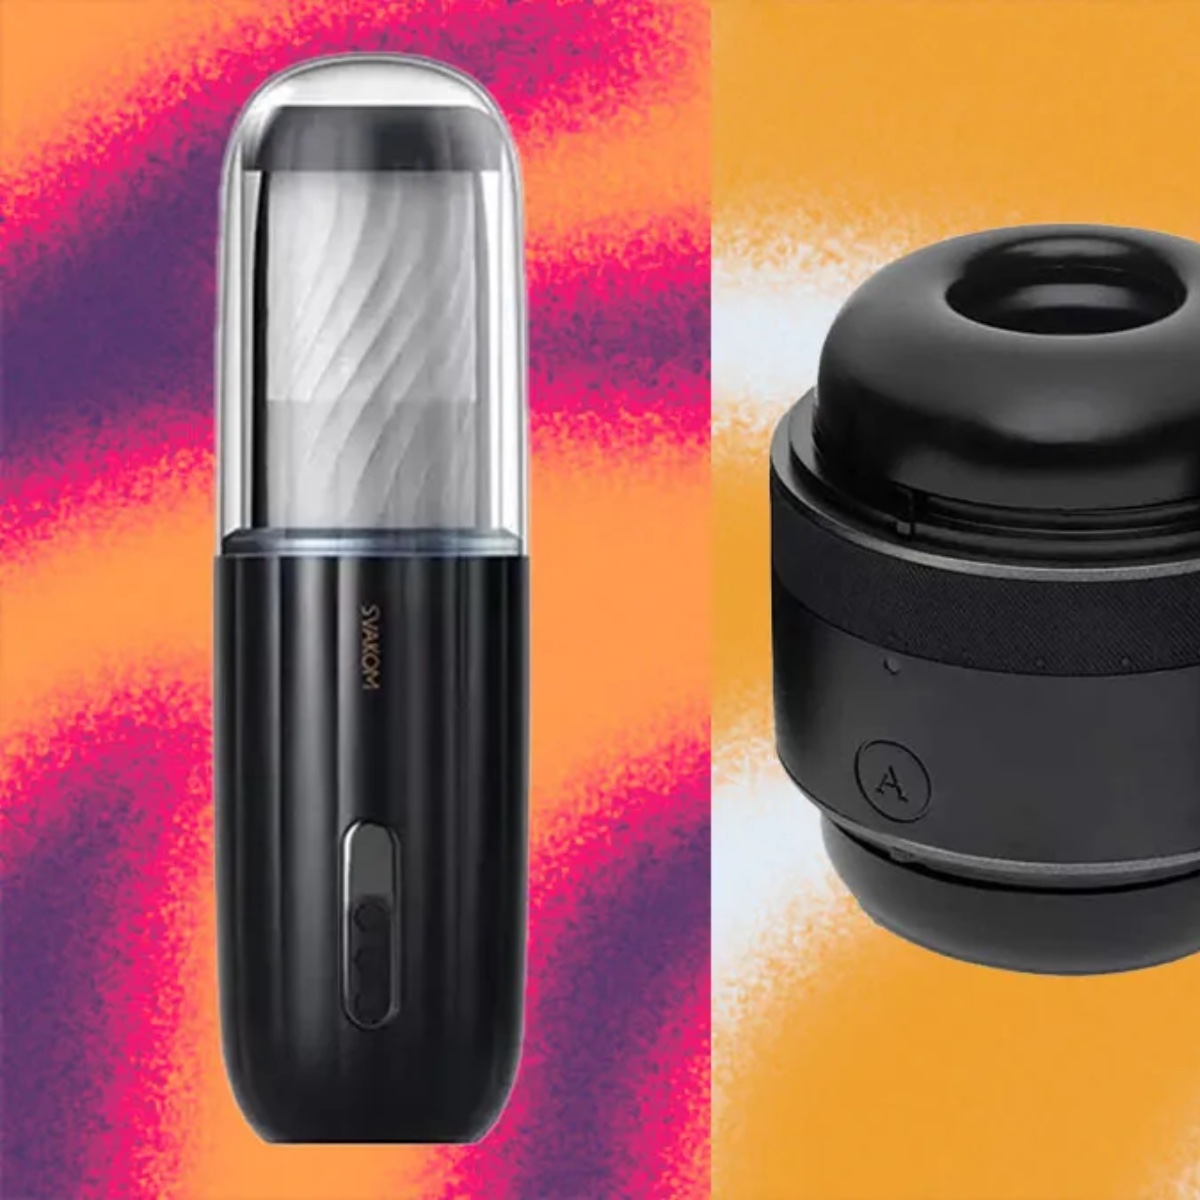 Automatic Male Stroker vs Manual: Which is Better?